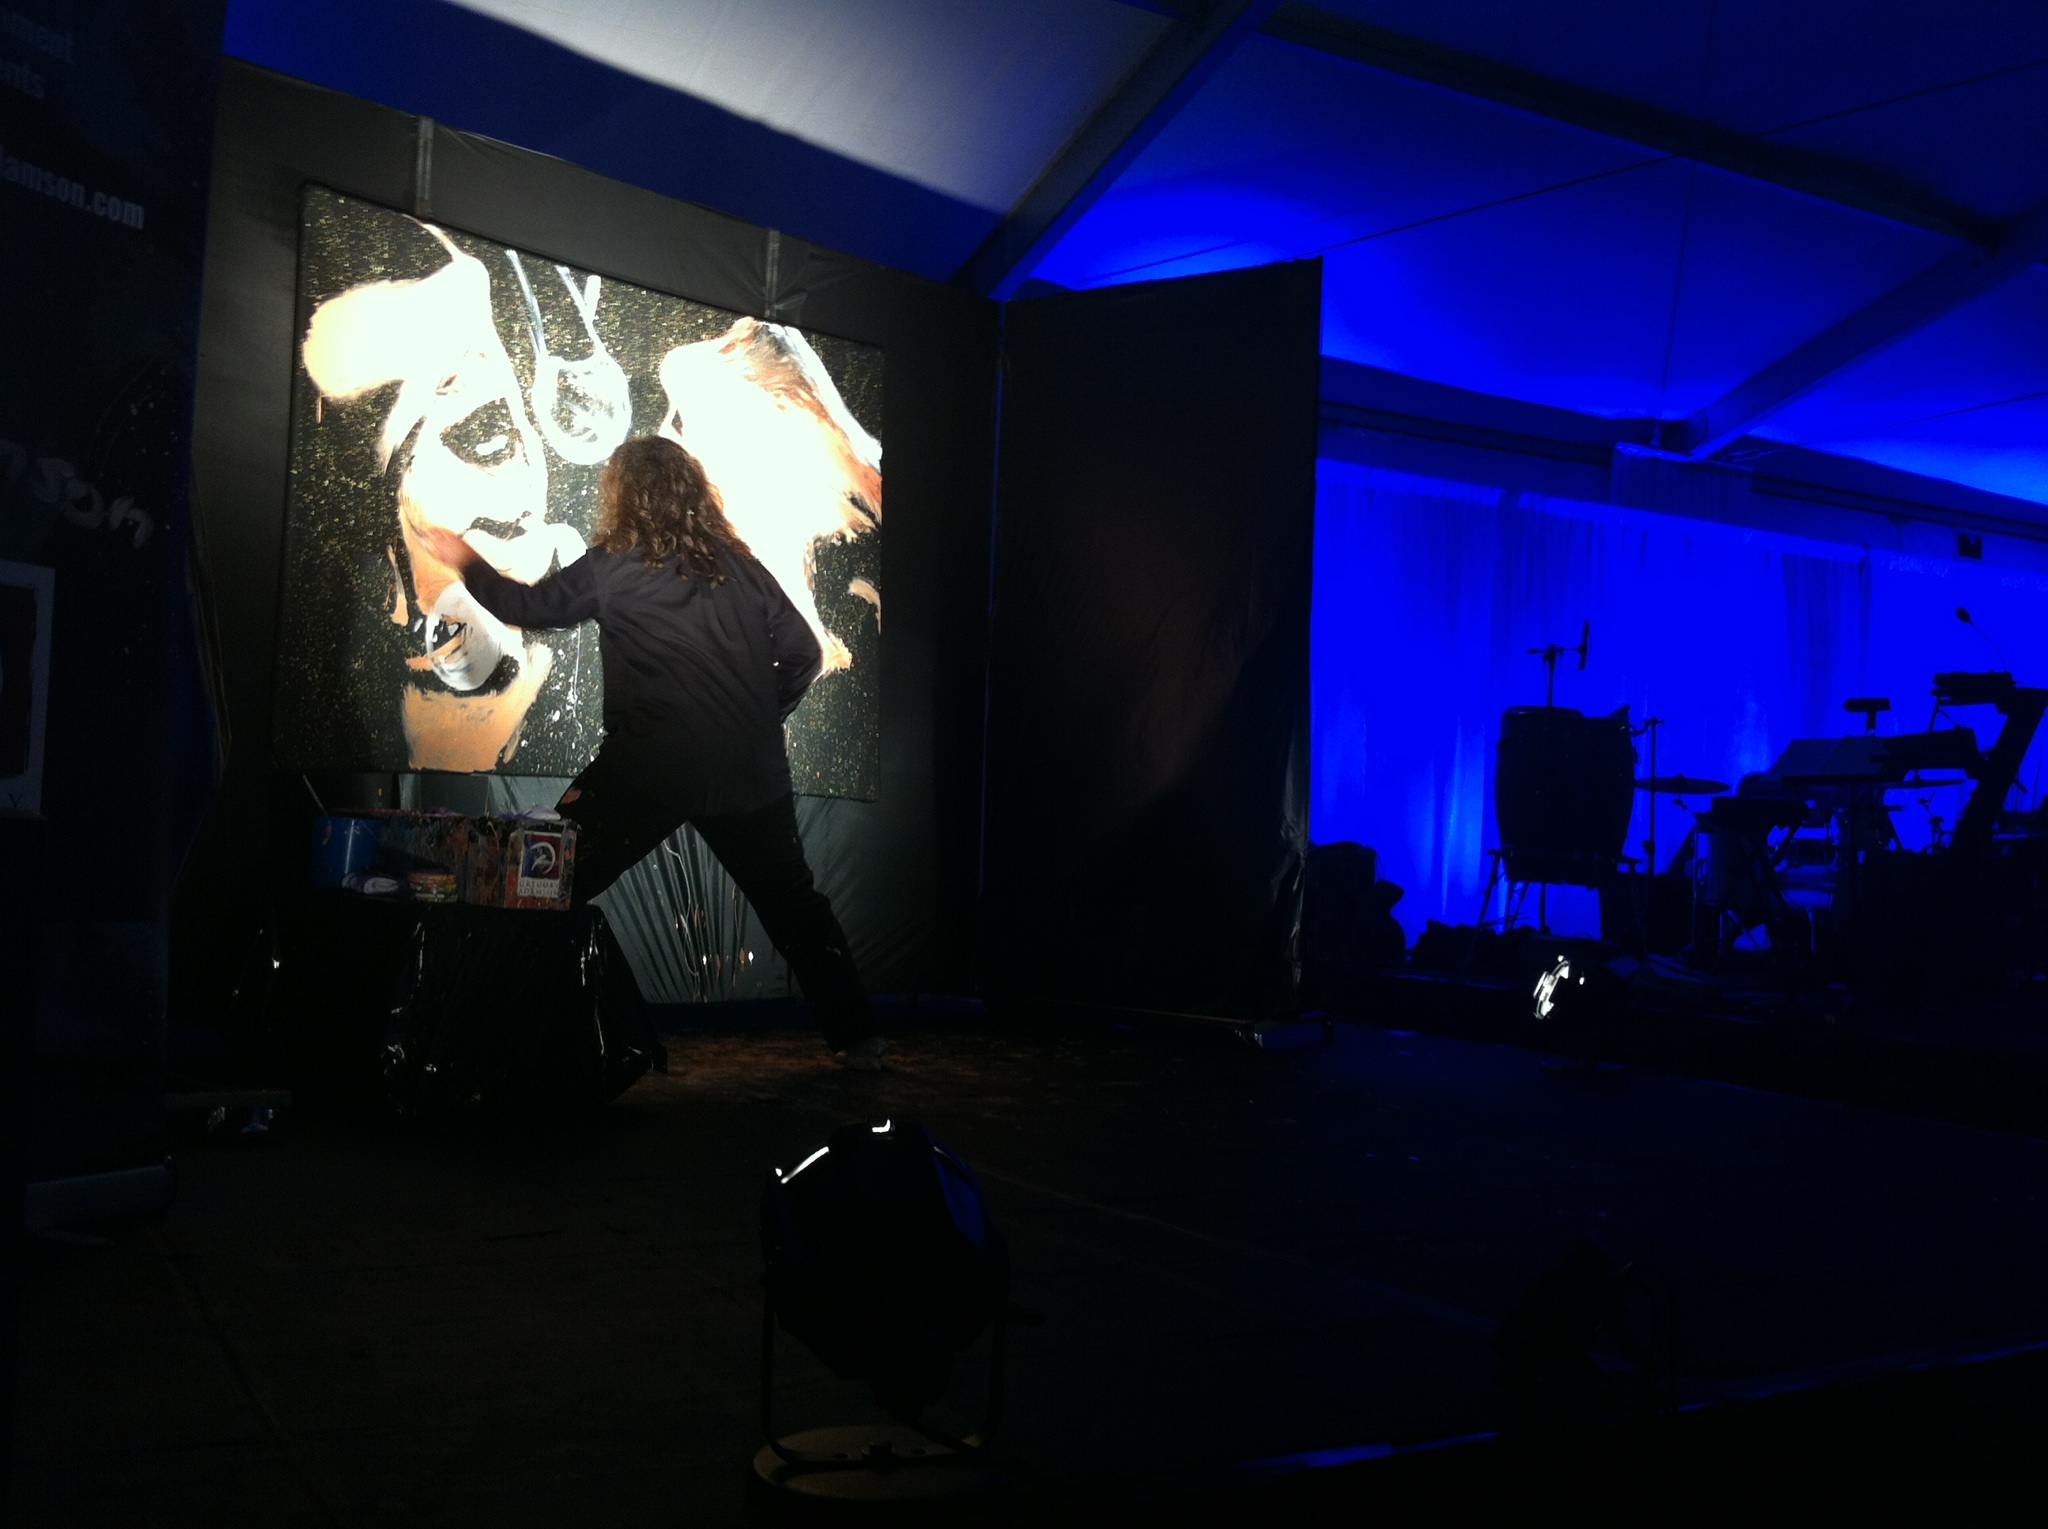 Gregory Adamson performance painting at a fundraising event